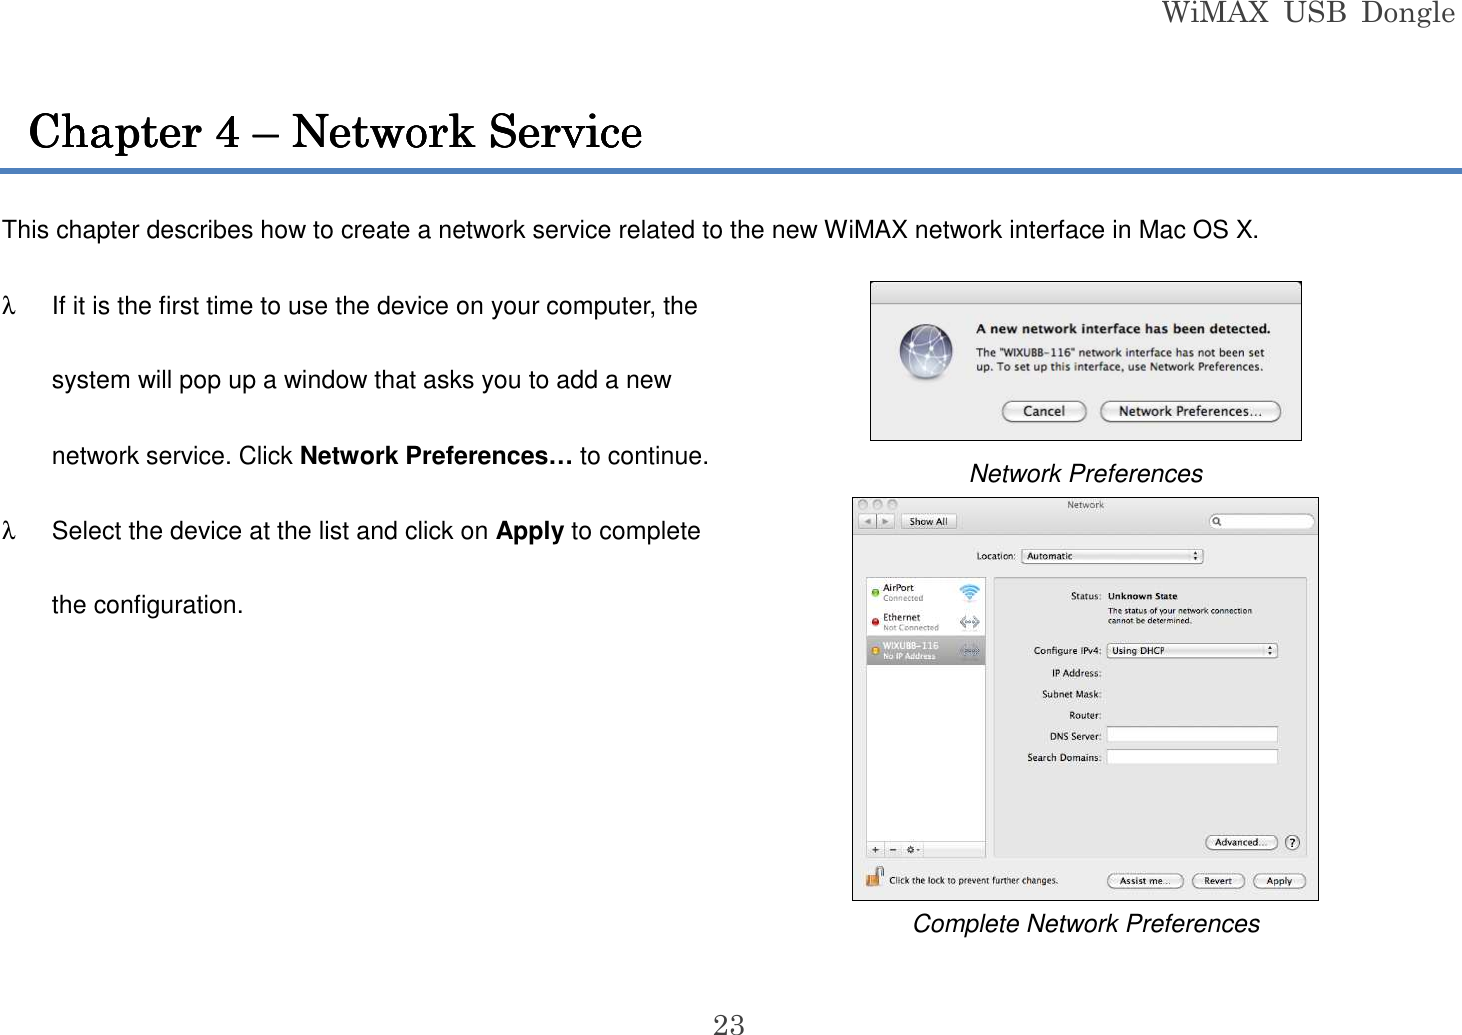 WiMAX  USB  Dongle  23 This chapter describes how to create a network service related to the new WiMAX network interface in Mac OS X. λ  If it is the first time to use the device on your computer, the system will pop up a window that asks you to add a new network service. Click Network Preferences… to continue. λ  Select the device at the list and click on Apply to complete the configuration.   Network Preferences  Complete Network Preferences Chapter Chapter Chapter Chapter 4444    –––– Network Service Network Service Network Service Network Service    